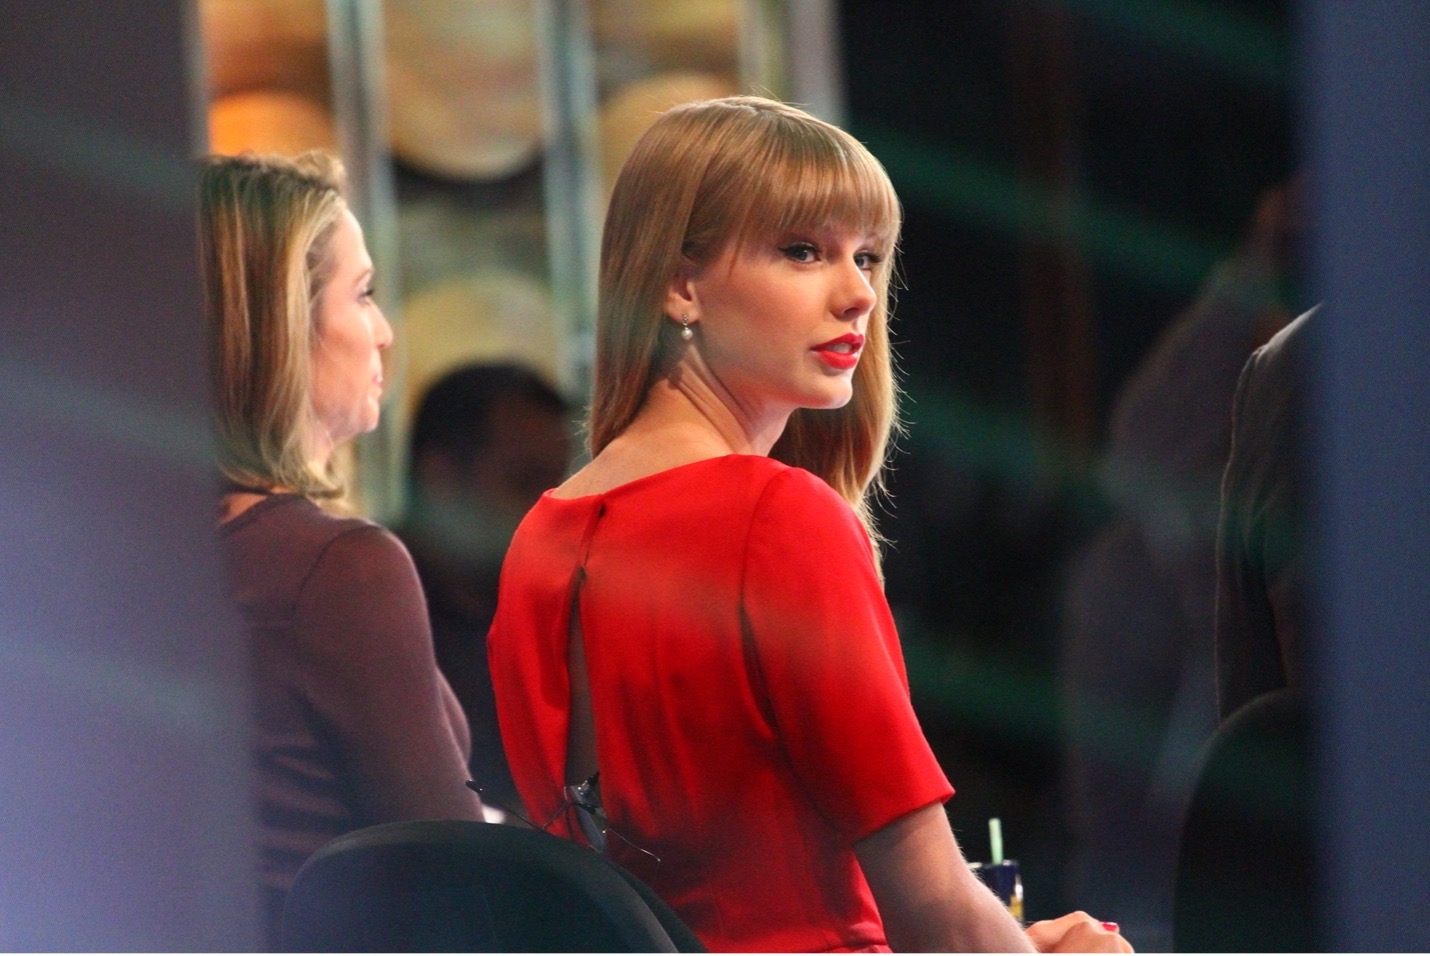 A picture of Taylor Swift wearing a red dress, sitting in a chair during an interview